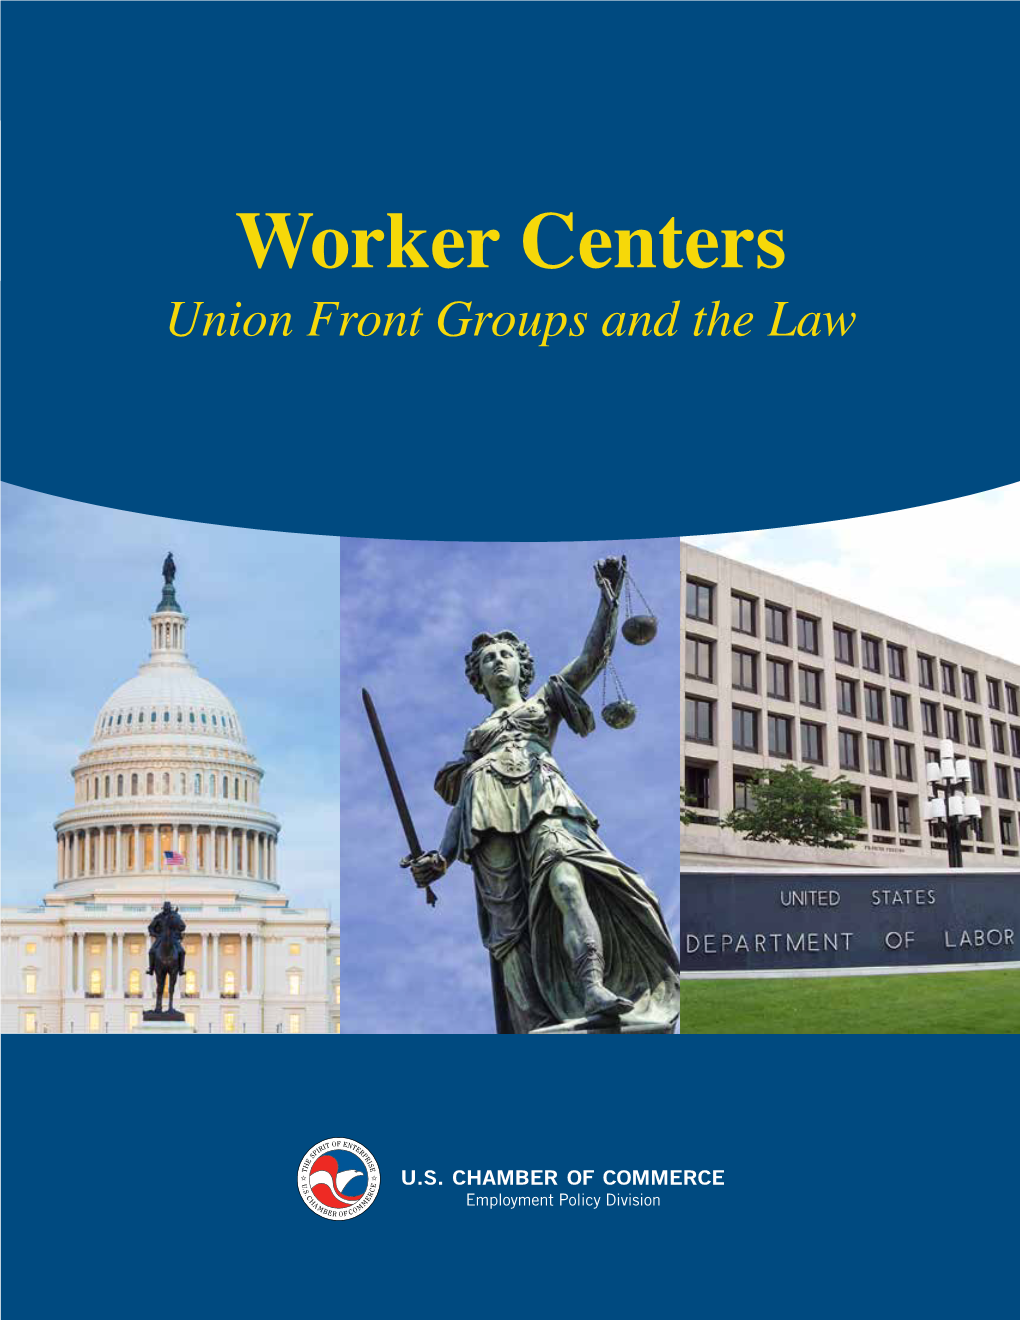 Worker Centers Union Front Groups and the Law